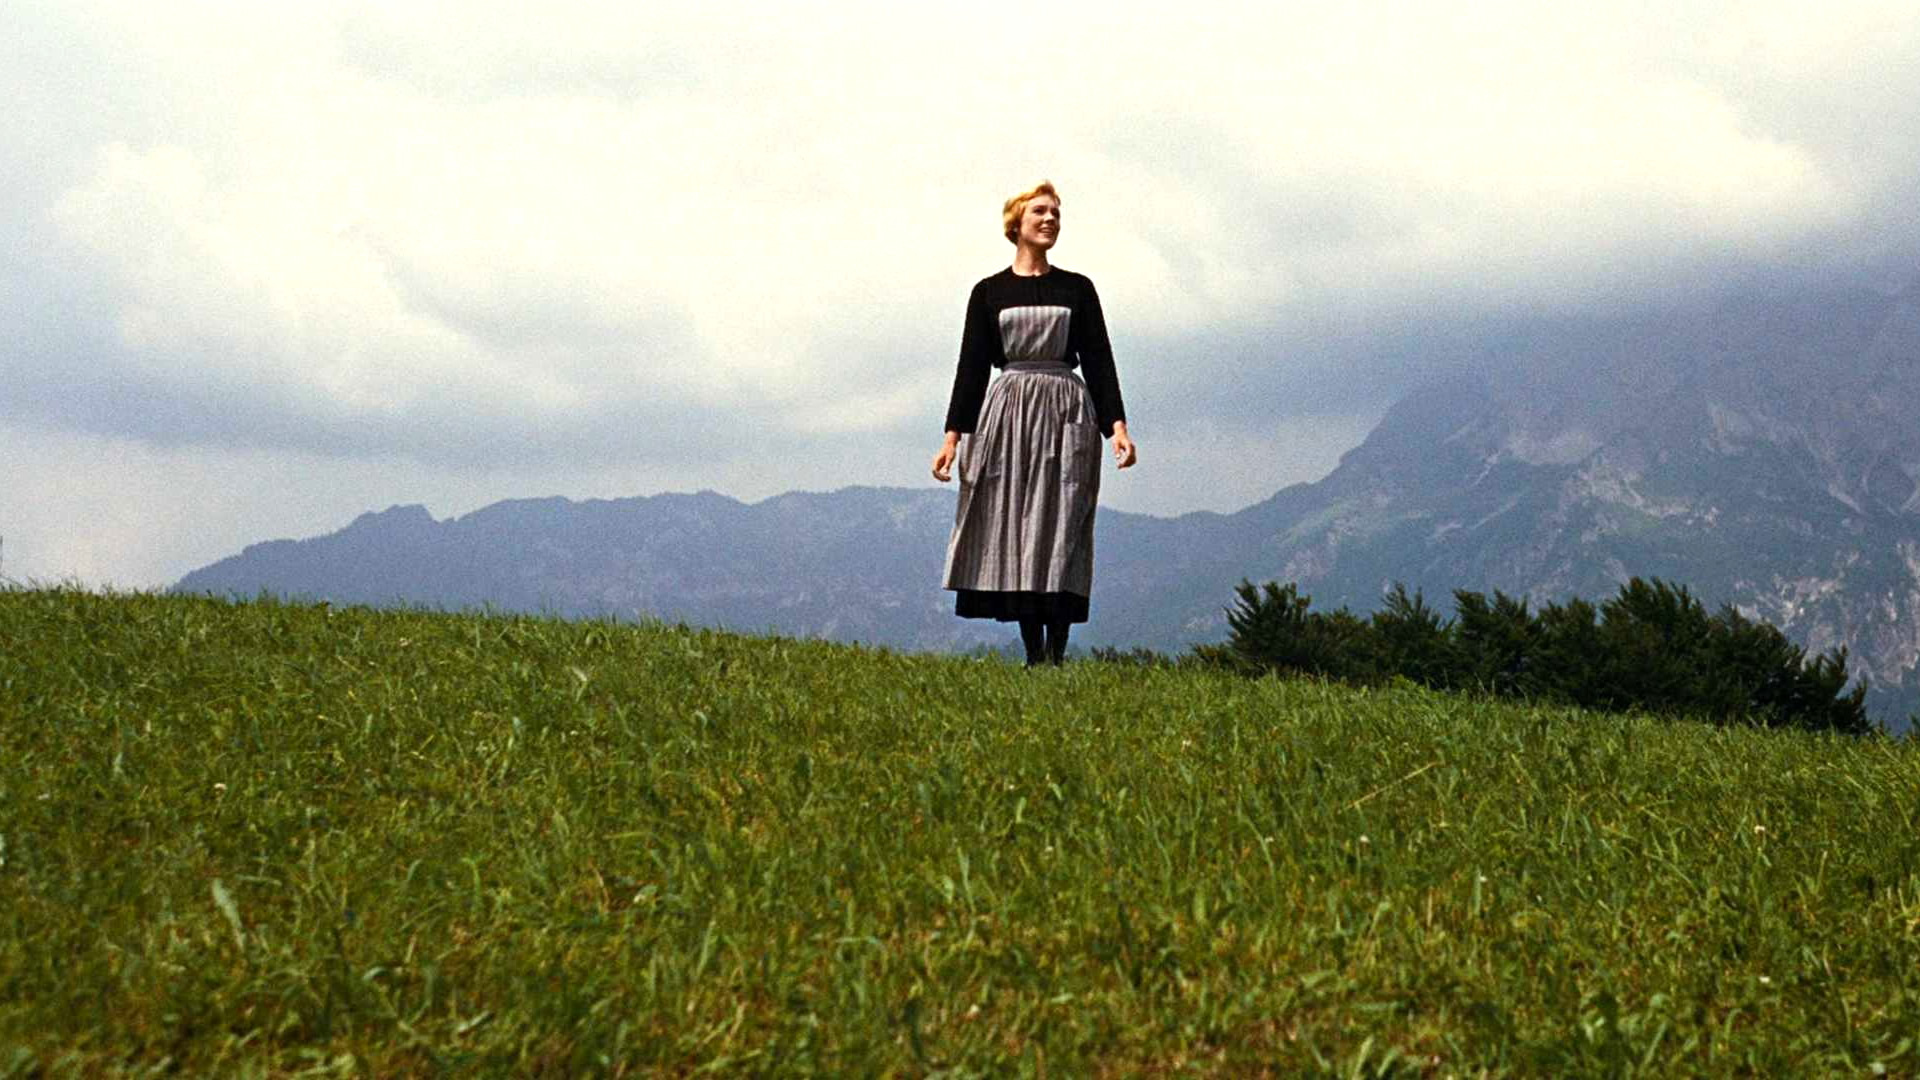 Download sound of music full movie english 1965